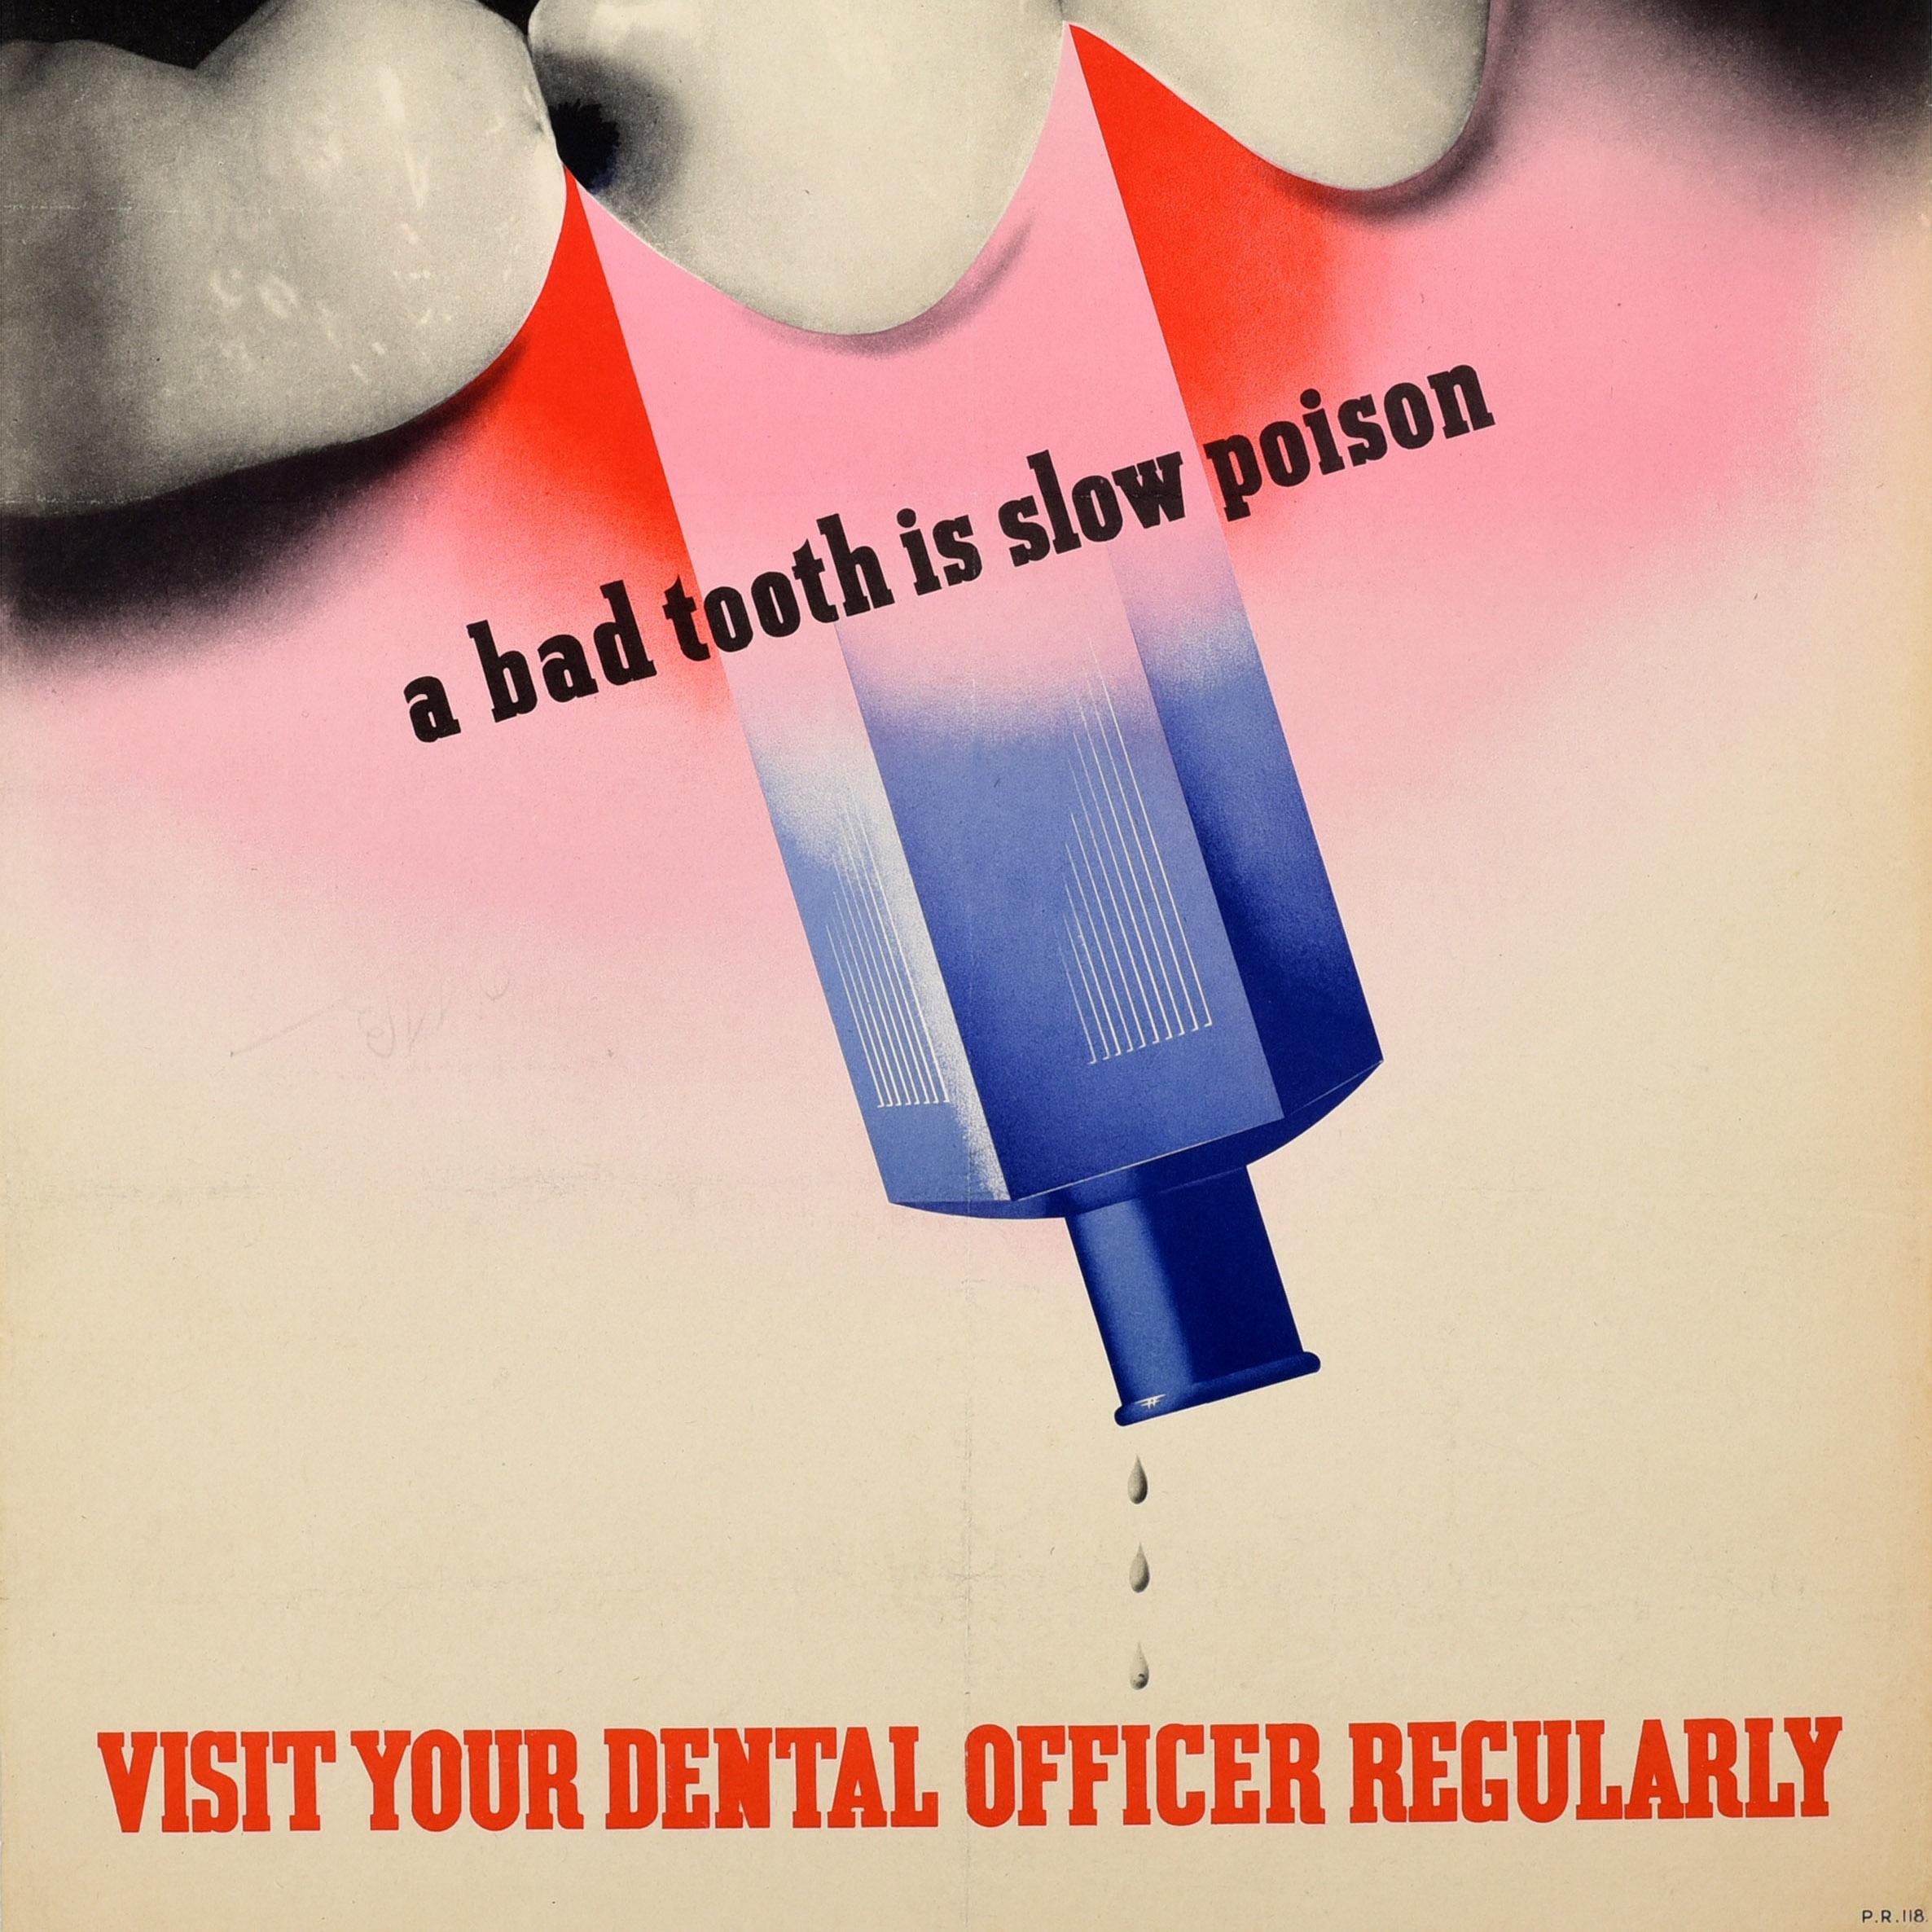 Original Vintage WWII Military Health Poster Bad Tooth Slow Poison Abram Games In Good Condition For Sale In London, GB